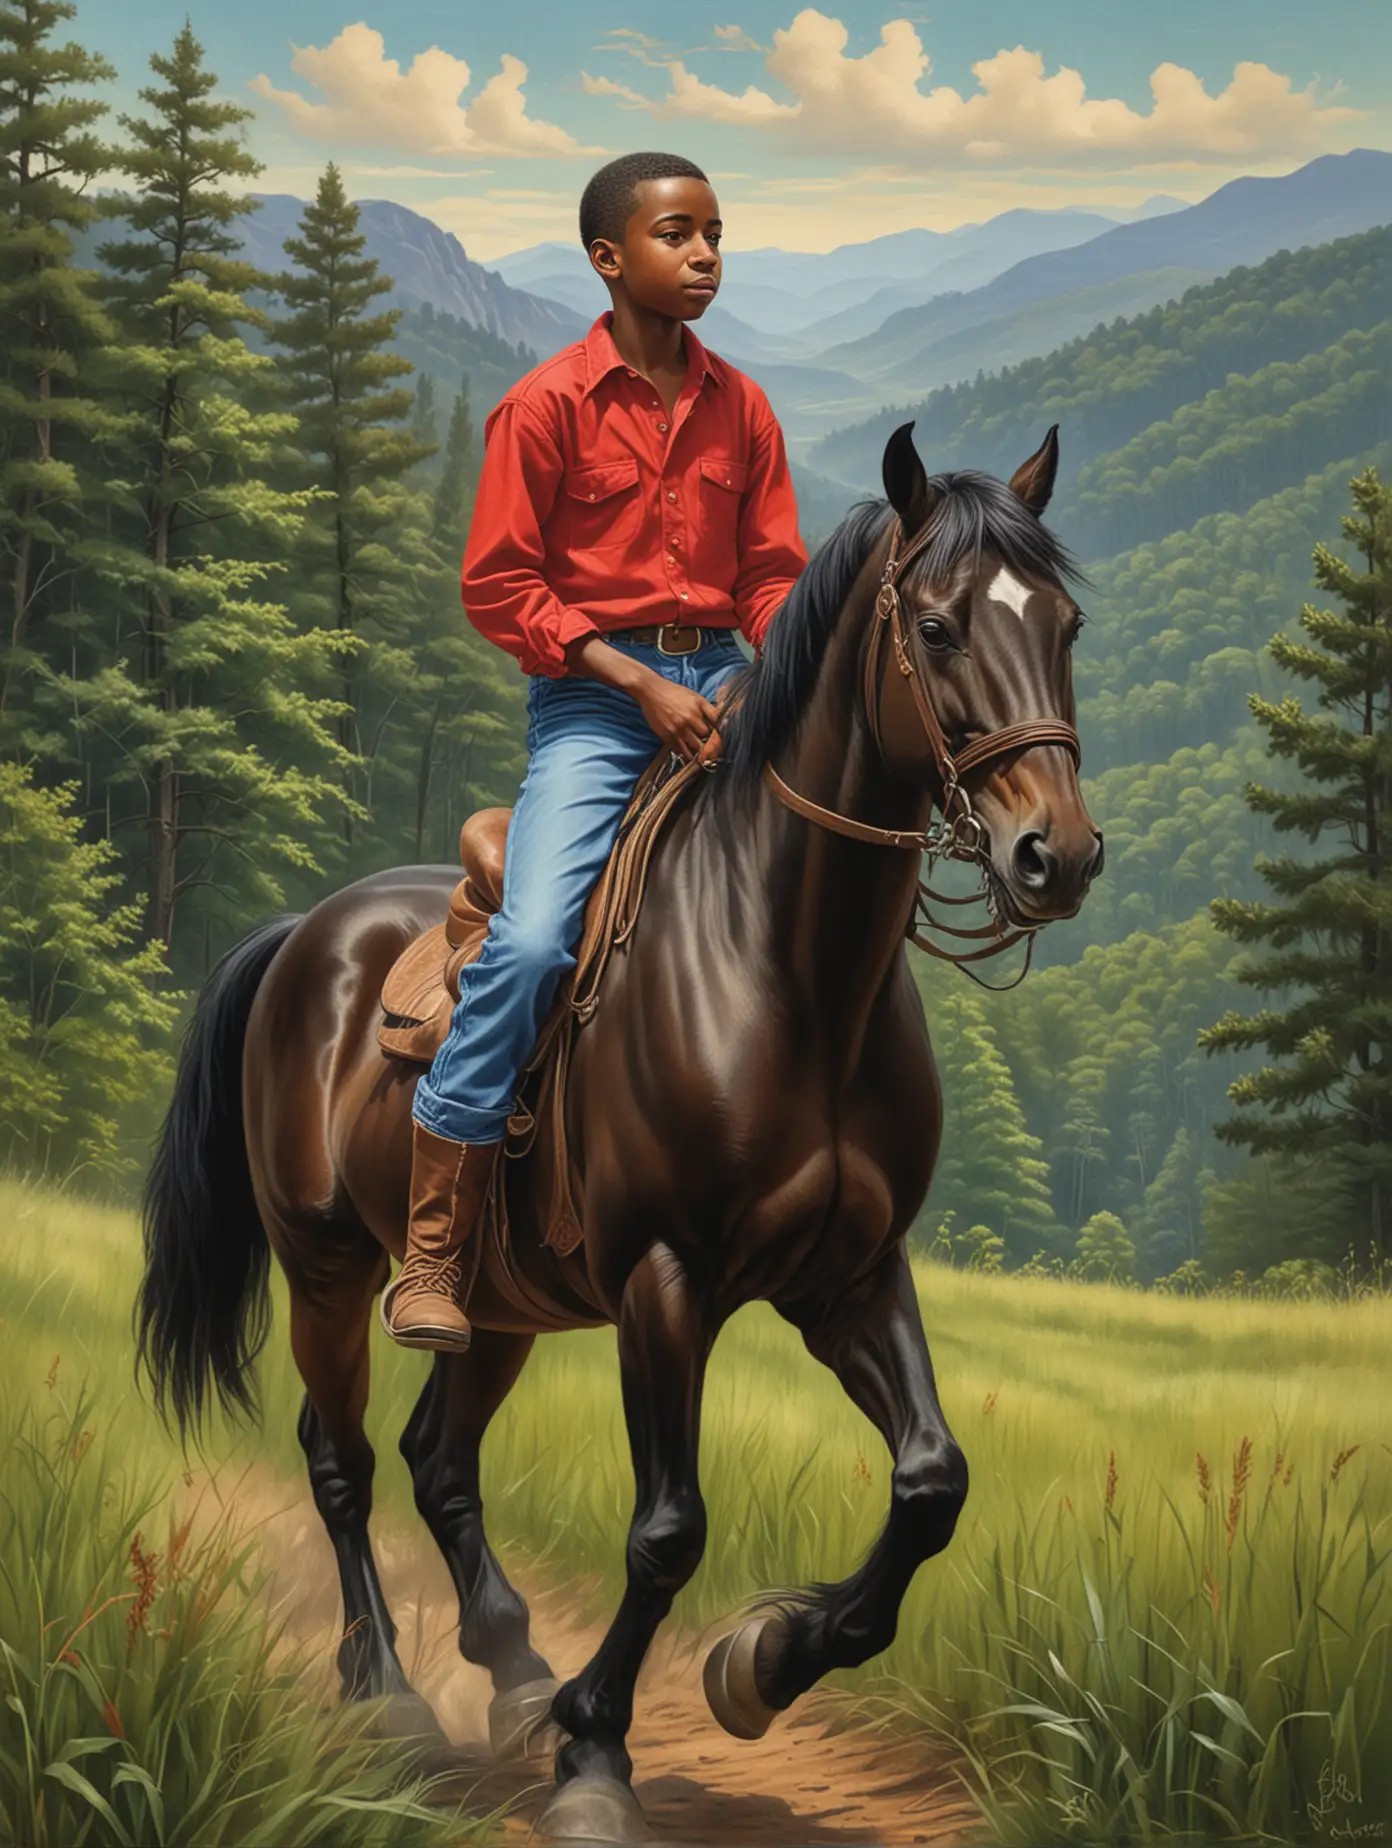 create an full length oil painting in the style of the artist Ernie Barnes, an medium tone African American boy 10 years old in a red shirt and jeans enjoying riding a black horse through a grassy field in the blue ridge mountains on a summer day